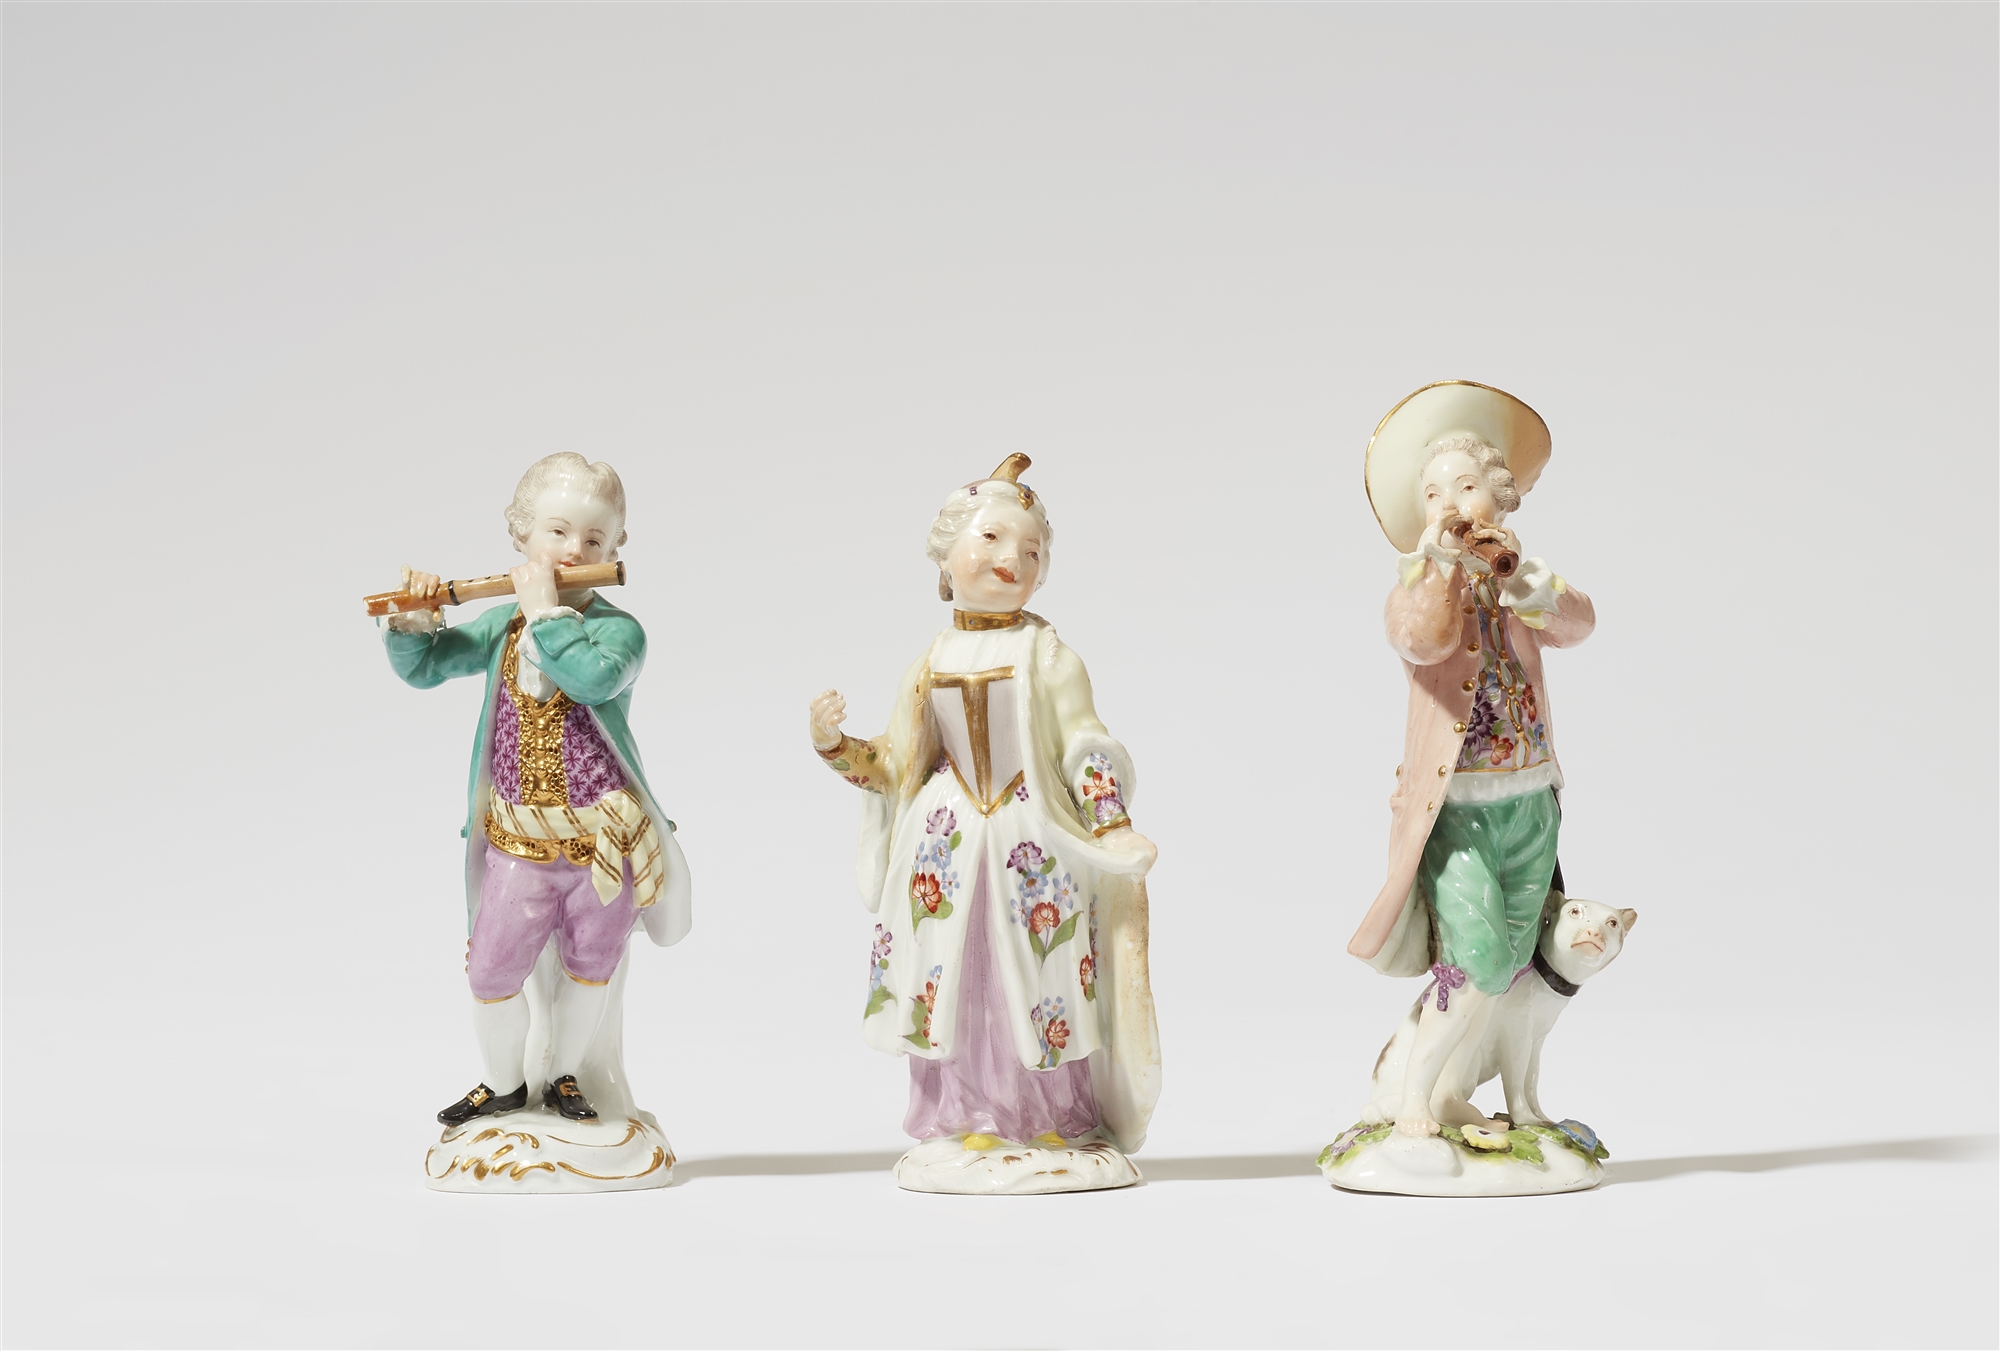 A Meissen porcelain figure of a boy with a flute - Image 3 of 3